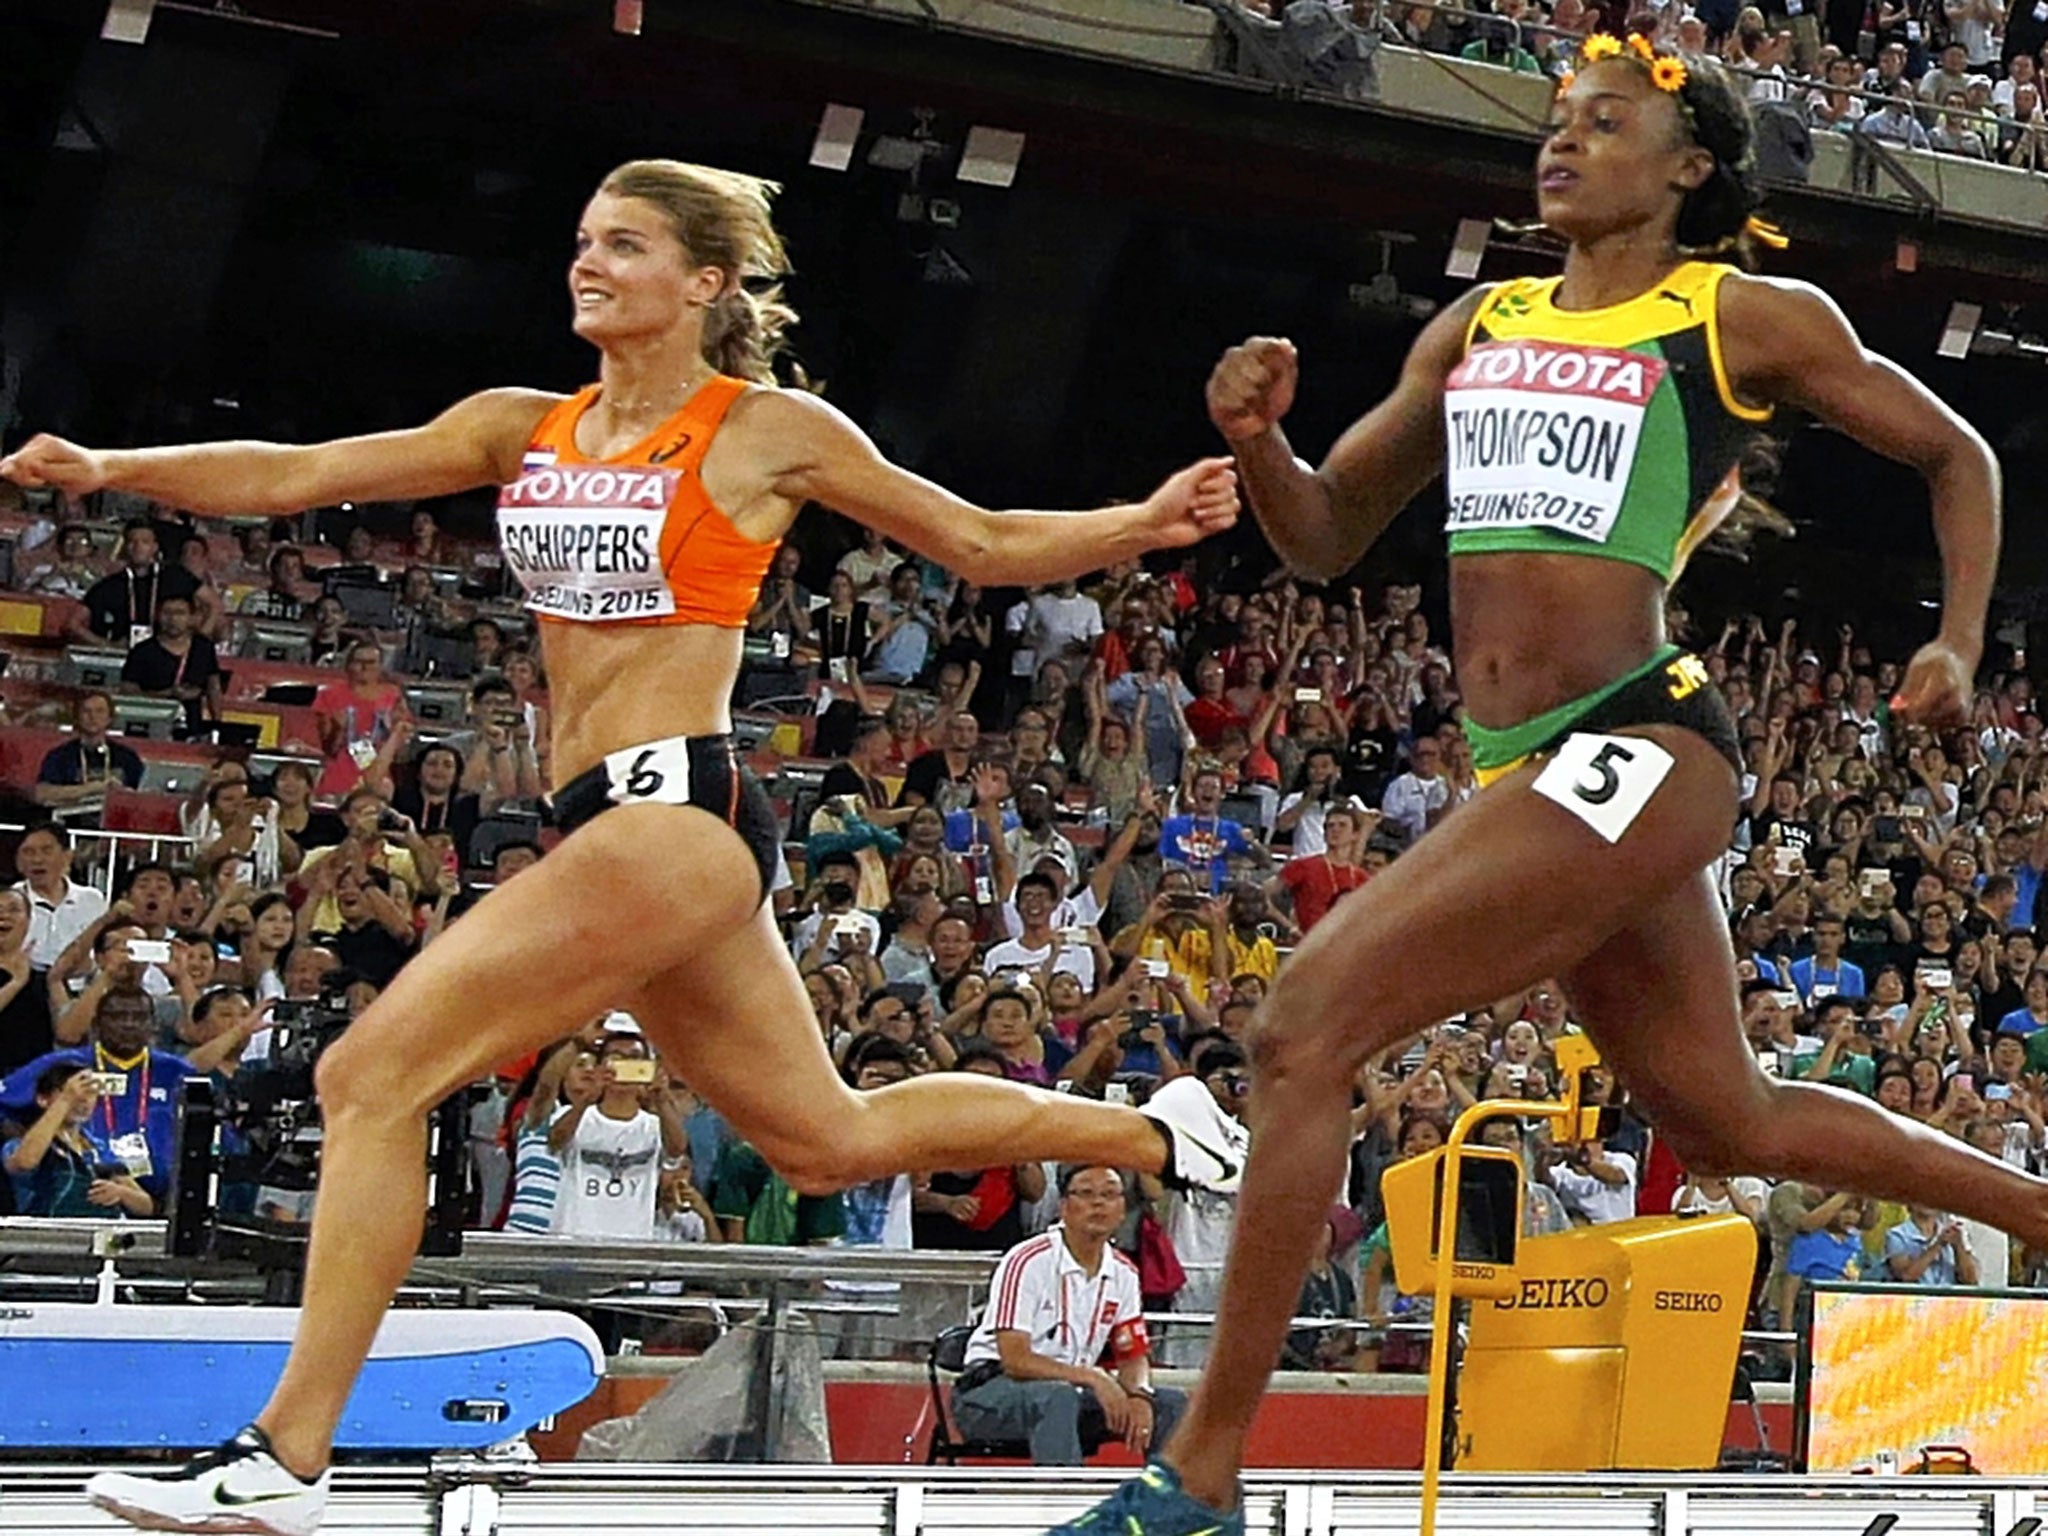 Dafne Schippers has protested her innocence after winning the 200m